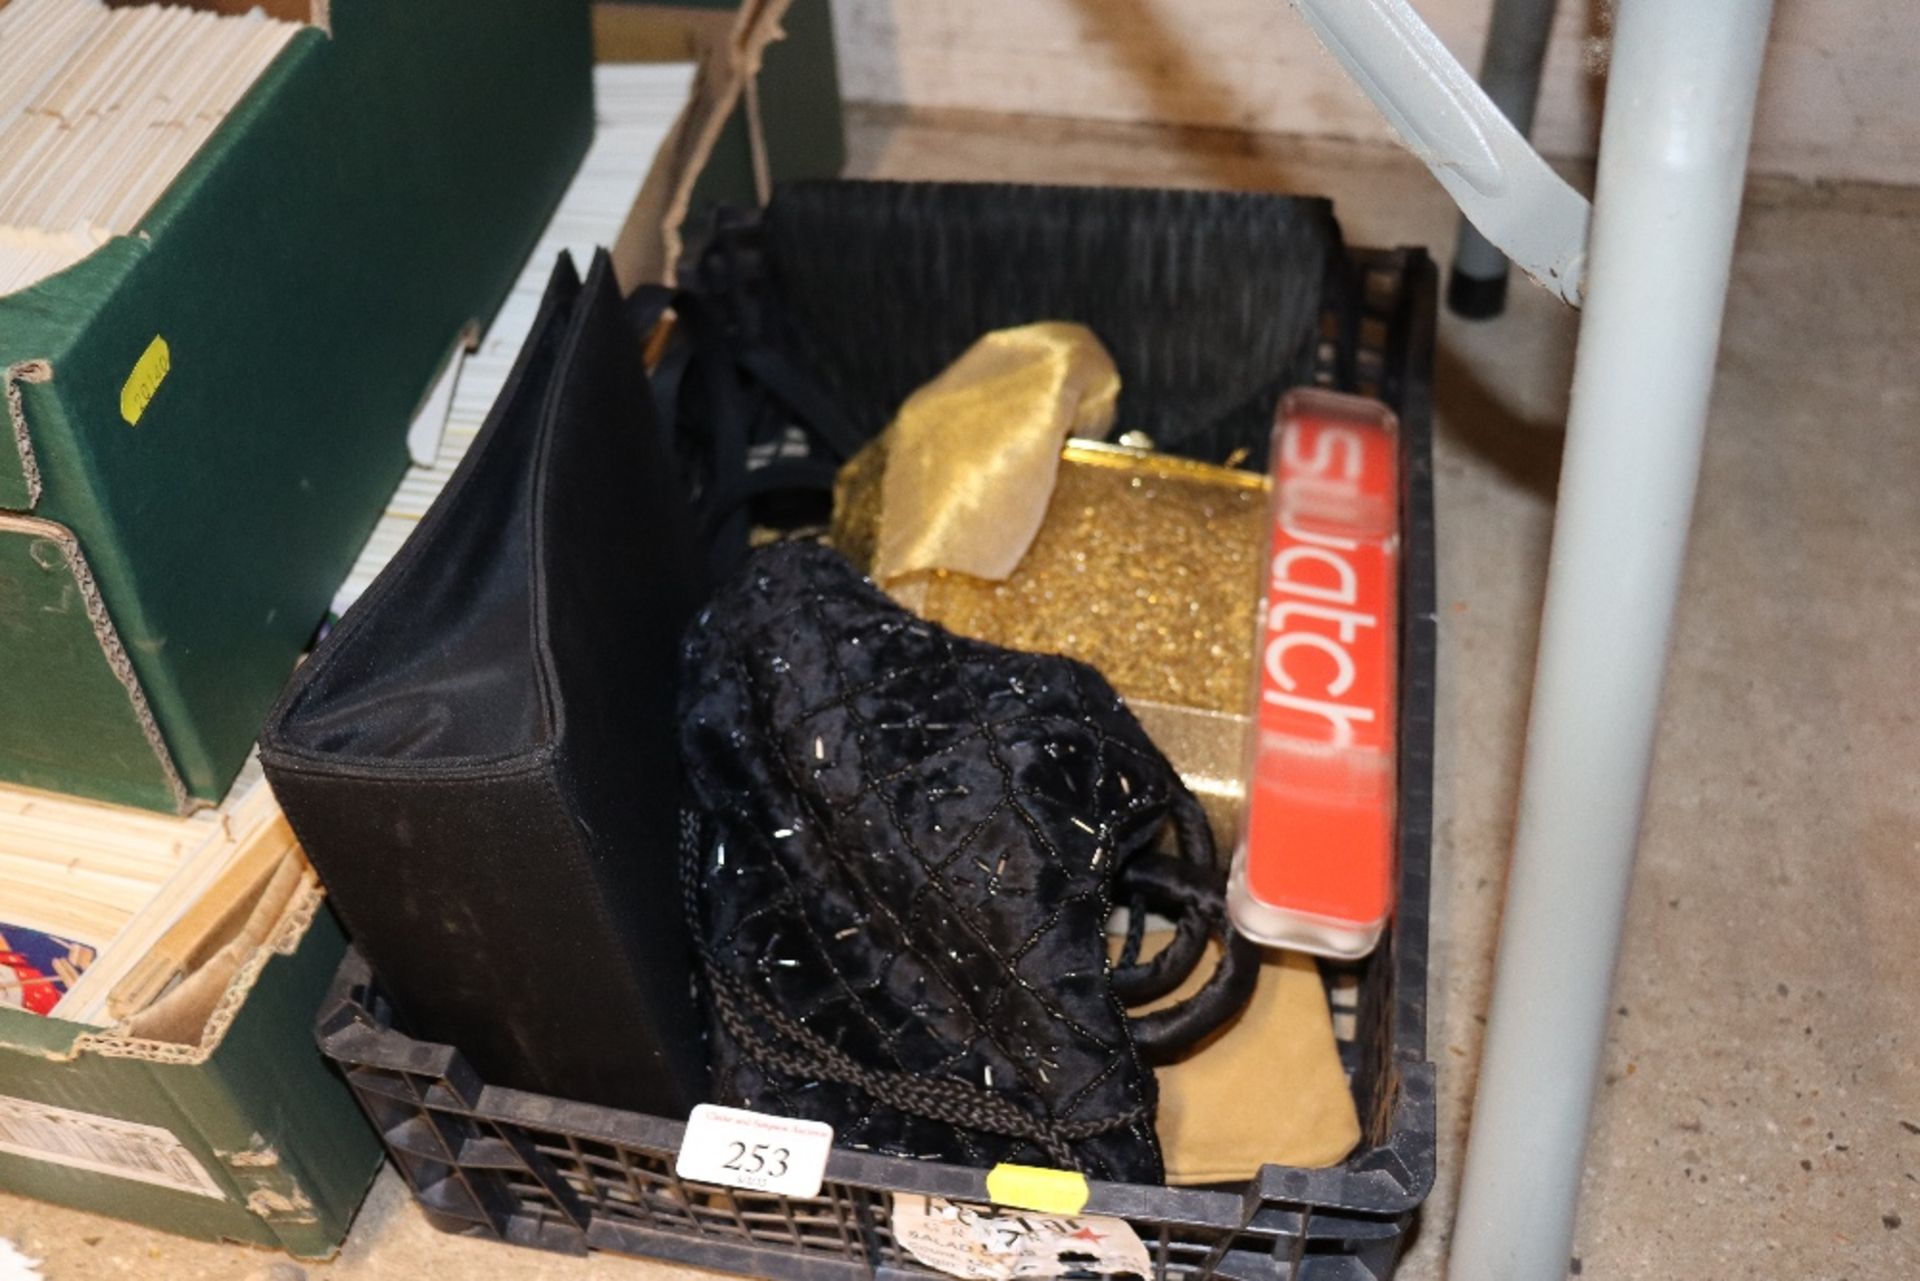 A box containing ladies purses and bags